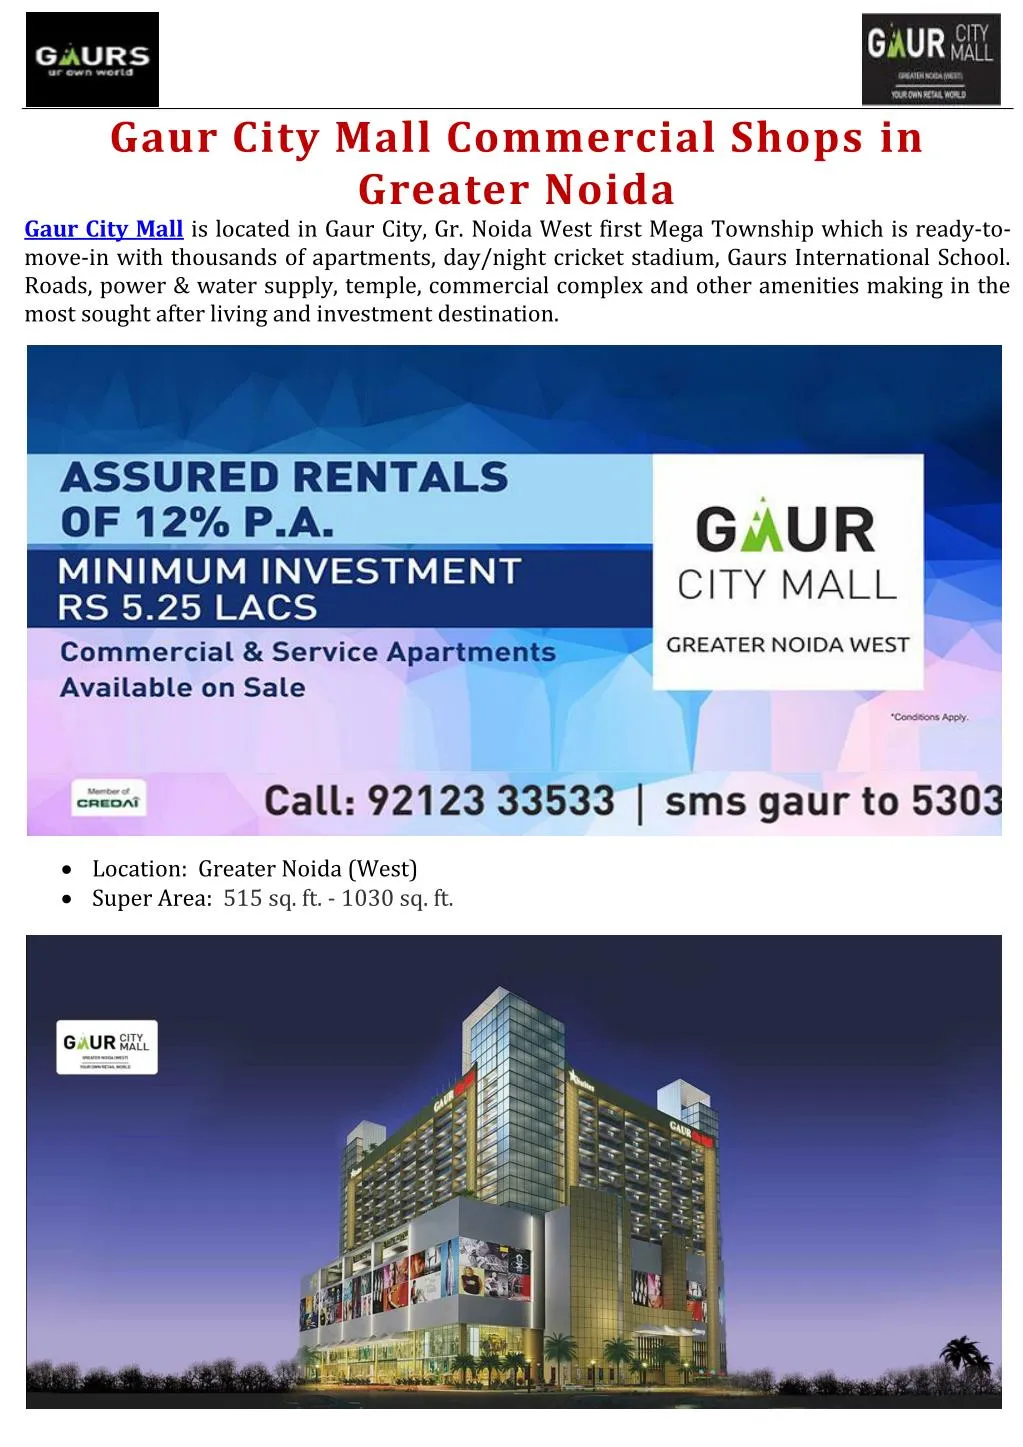 gaur city mall commercial shops in greater noida